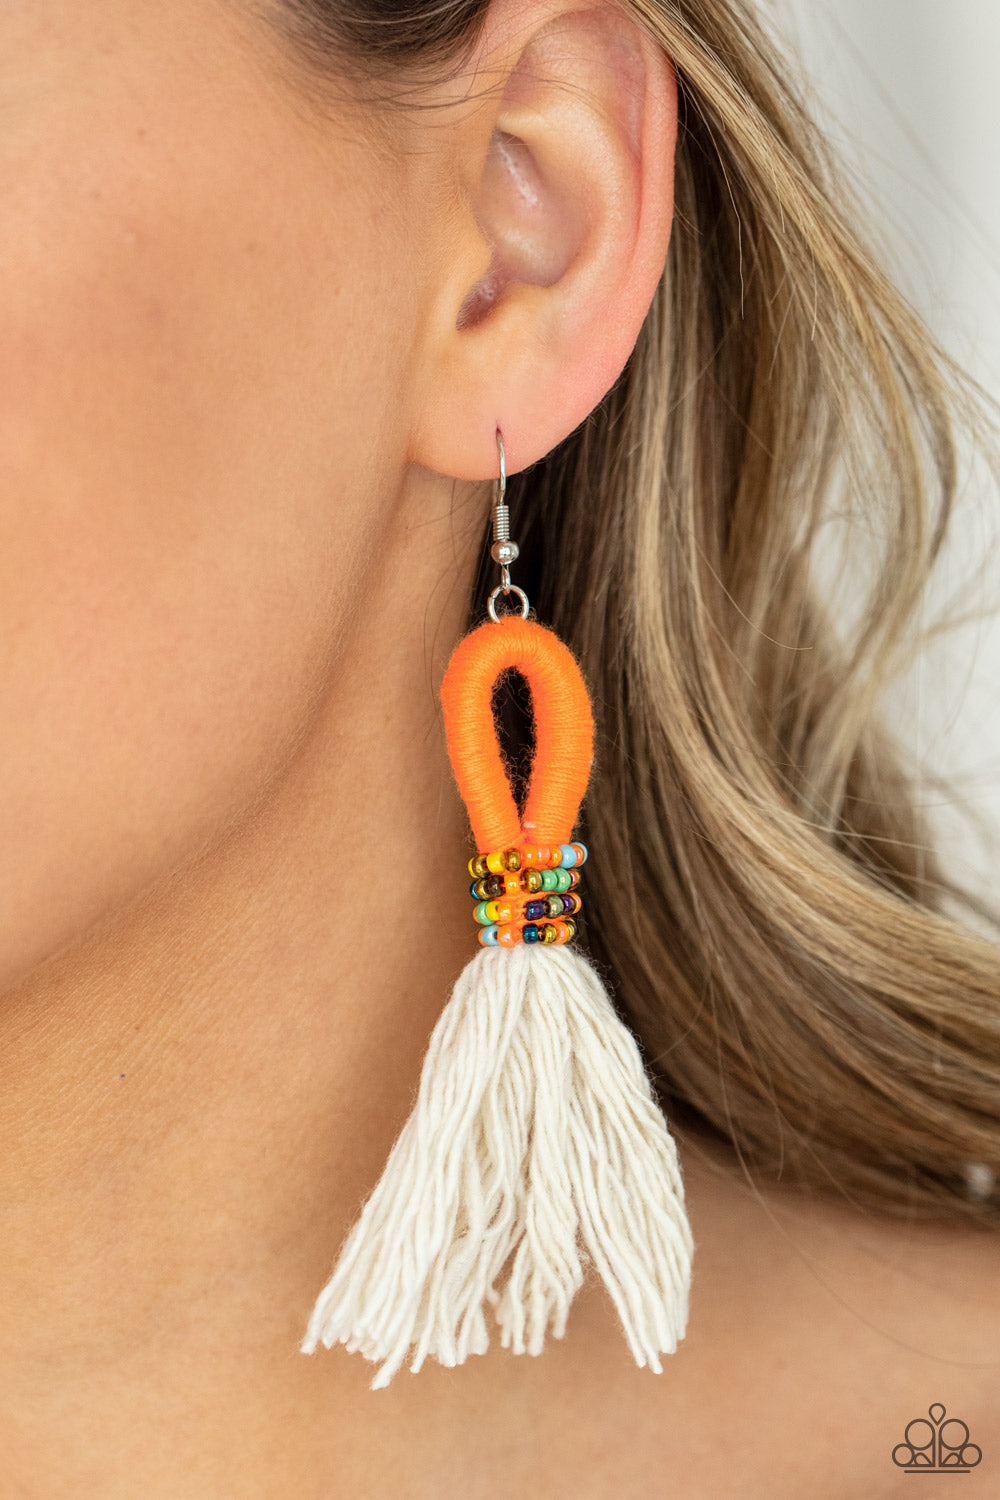 The Dustup Orange Earring - Paparazzi Accessories  A tassel of soft white cotton fans out under rows of brightly colored seed beads. Anchored by a loop of vibrant orange floss, the eye-catching style swings from the ear for a show-stopping statement. Earring attaches to a standard fishhook fitting.  All Paparazzi Accessories are lead free and nickel free!  Sold as one pair of earrings.